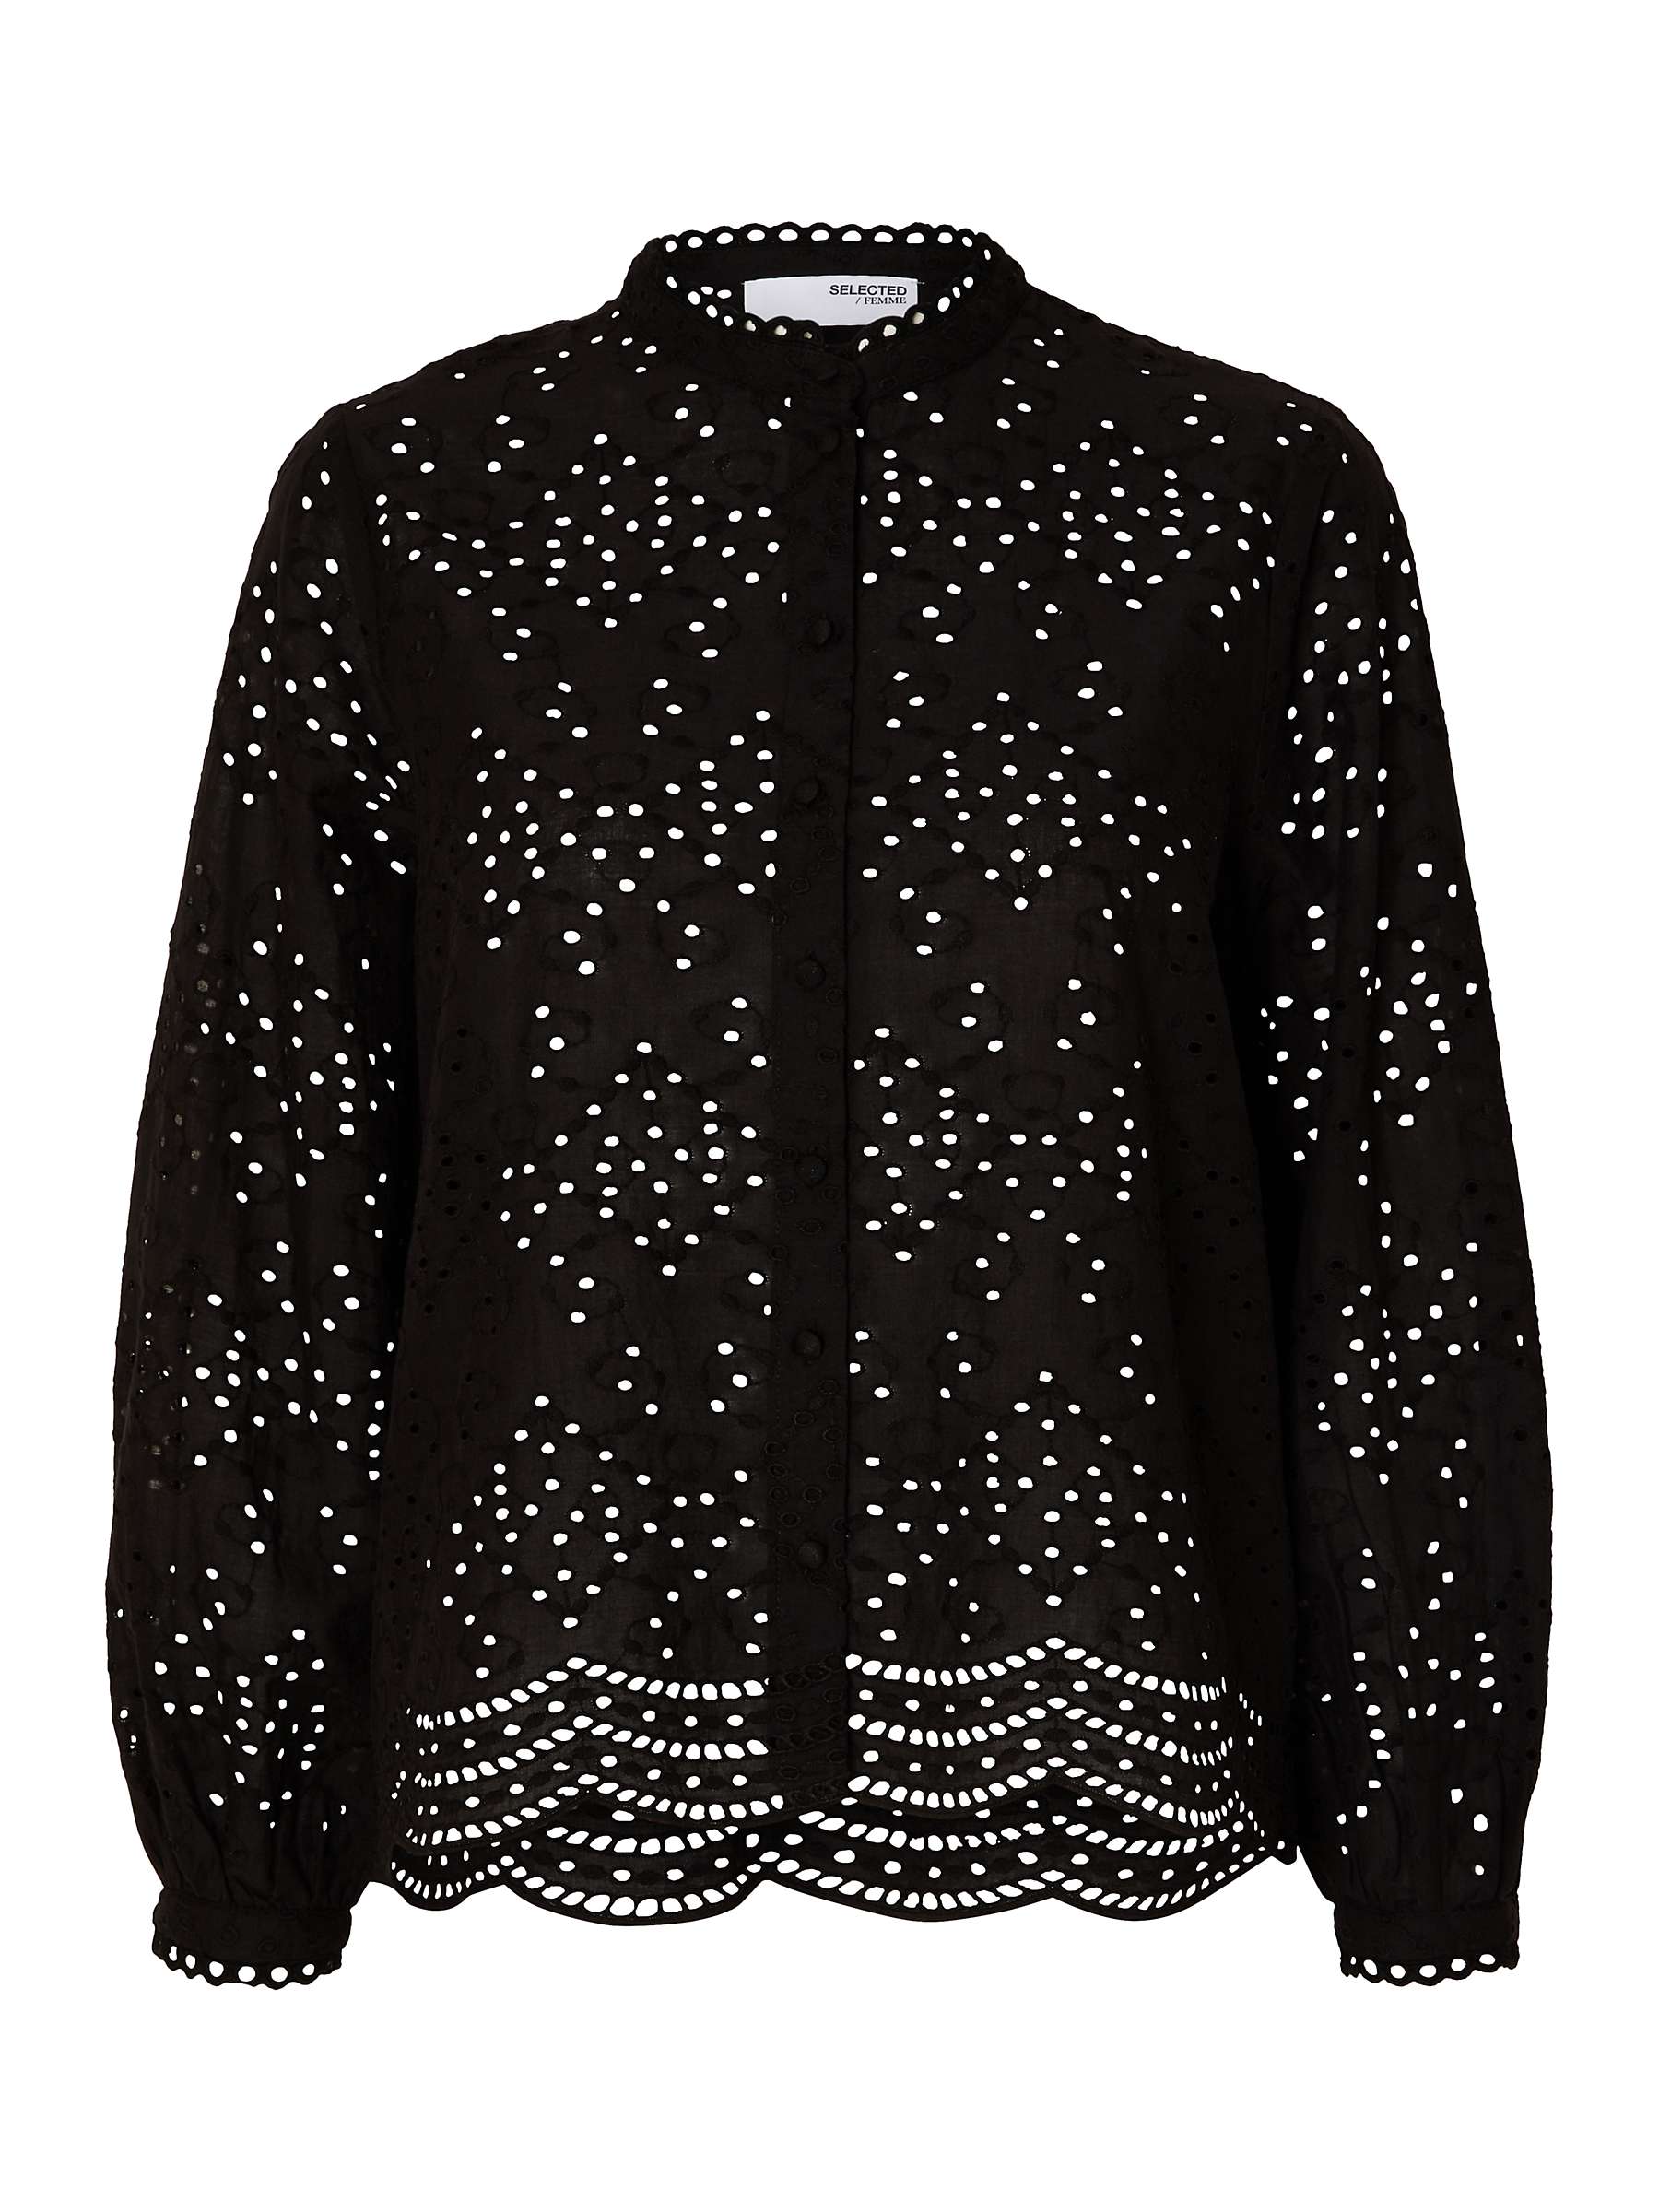 Buy SELECTED FEMME Taina Broderie Blouse Online at johnlewis.com